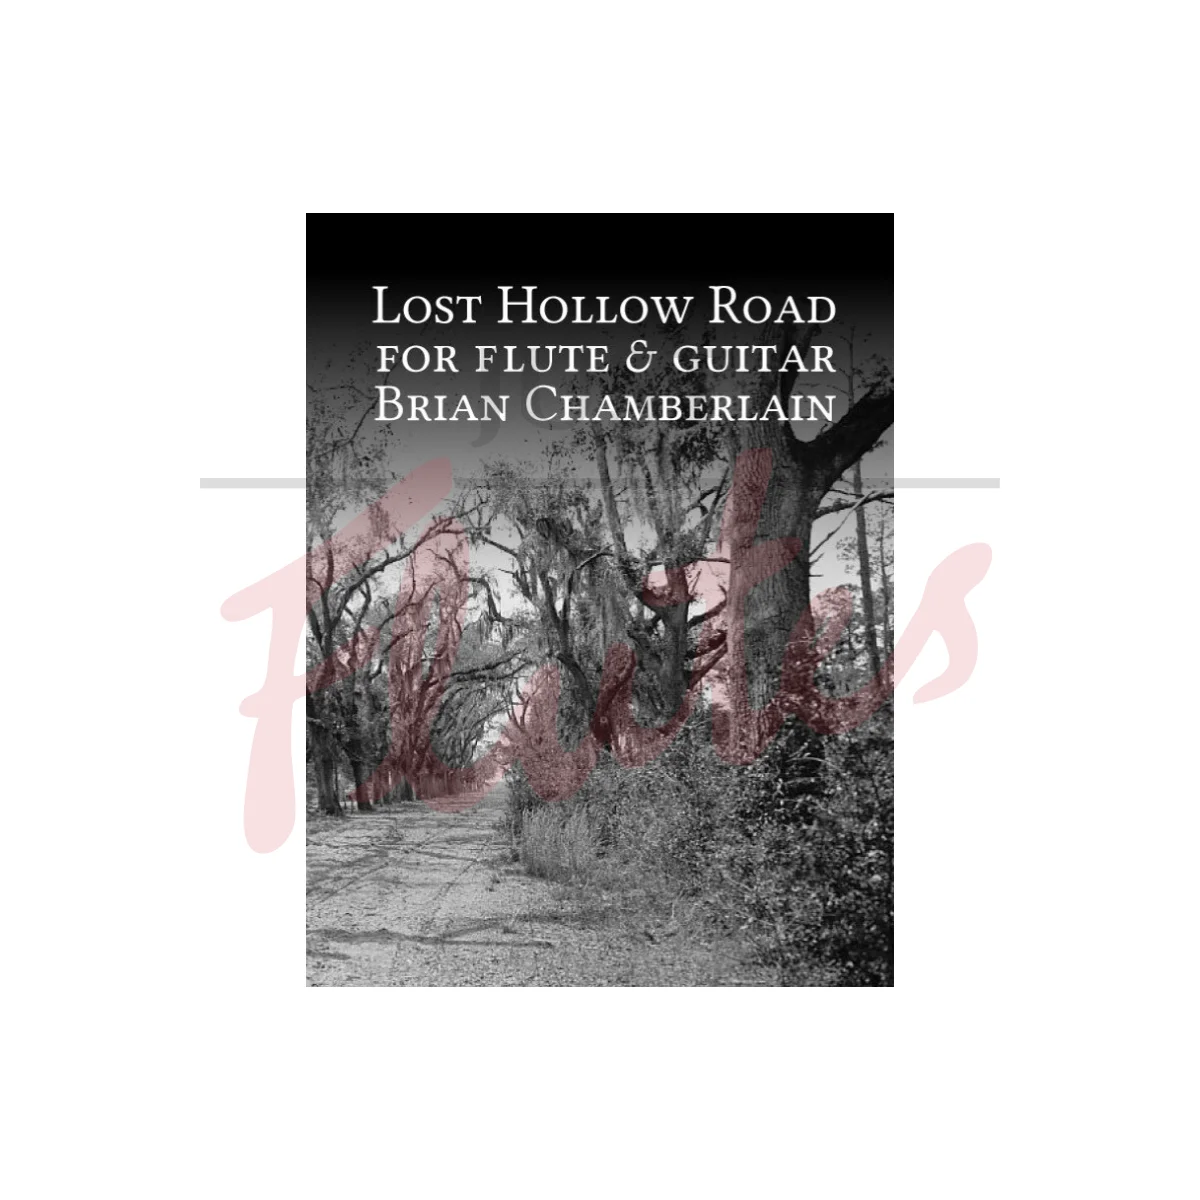 Lost Hollow Road for Flute and Guitar